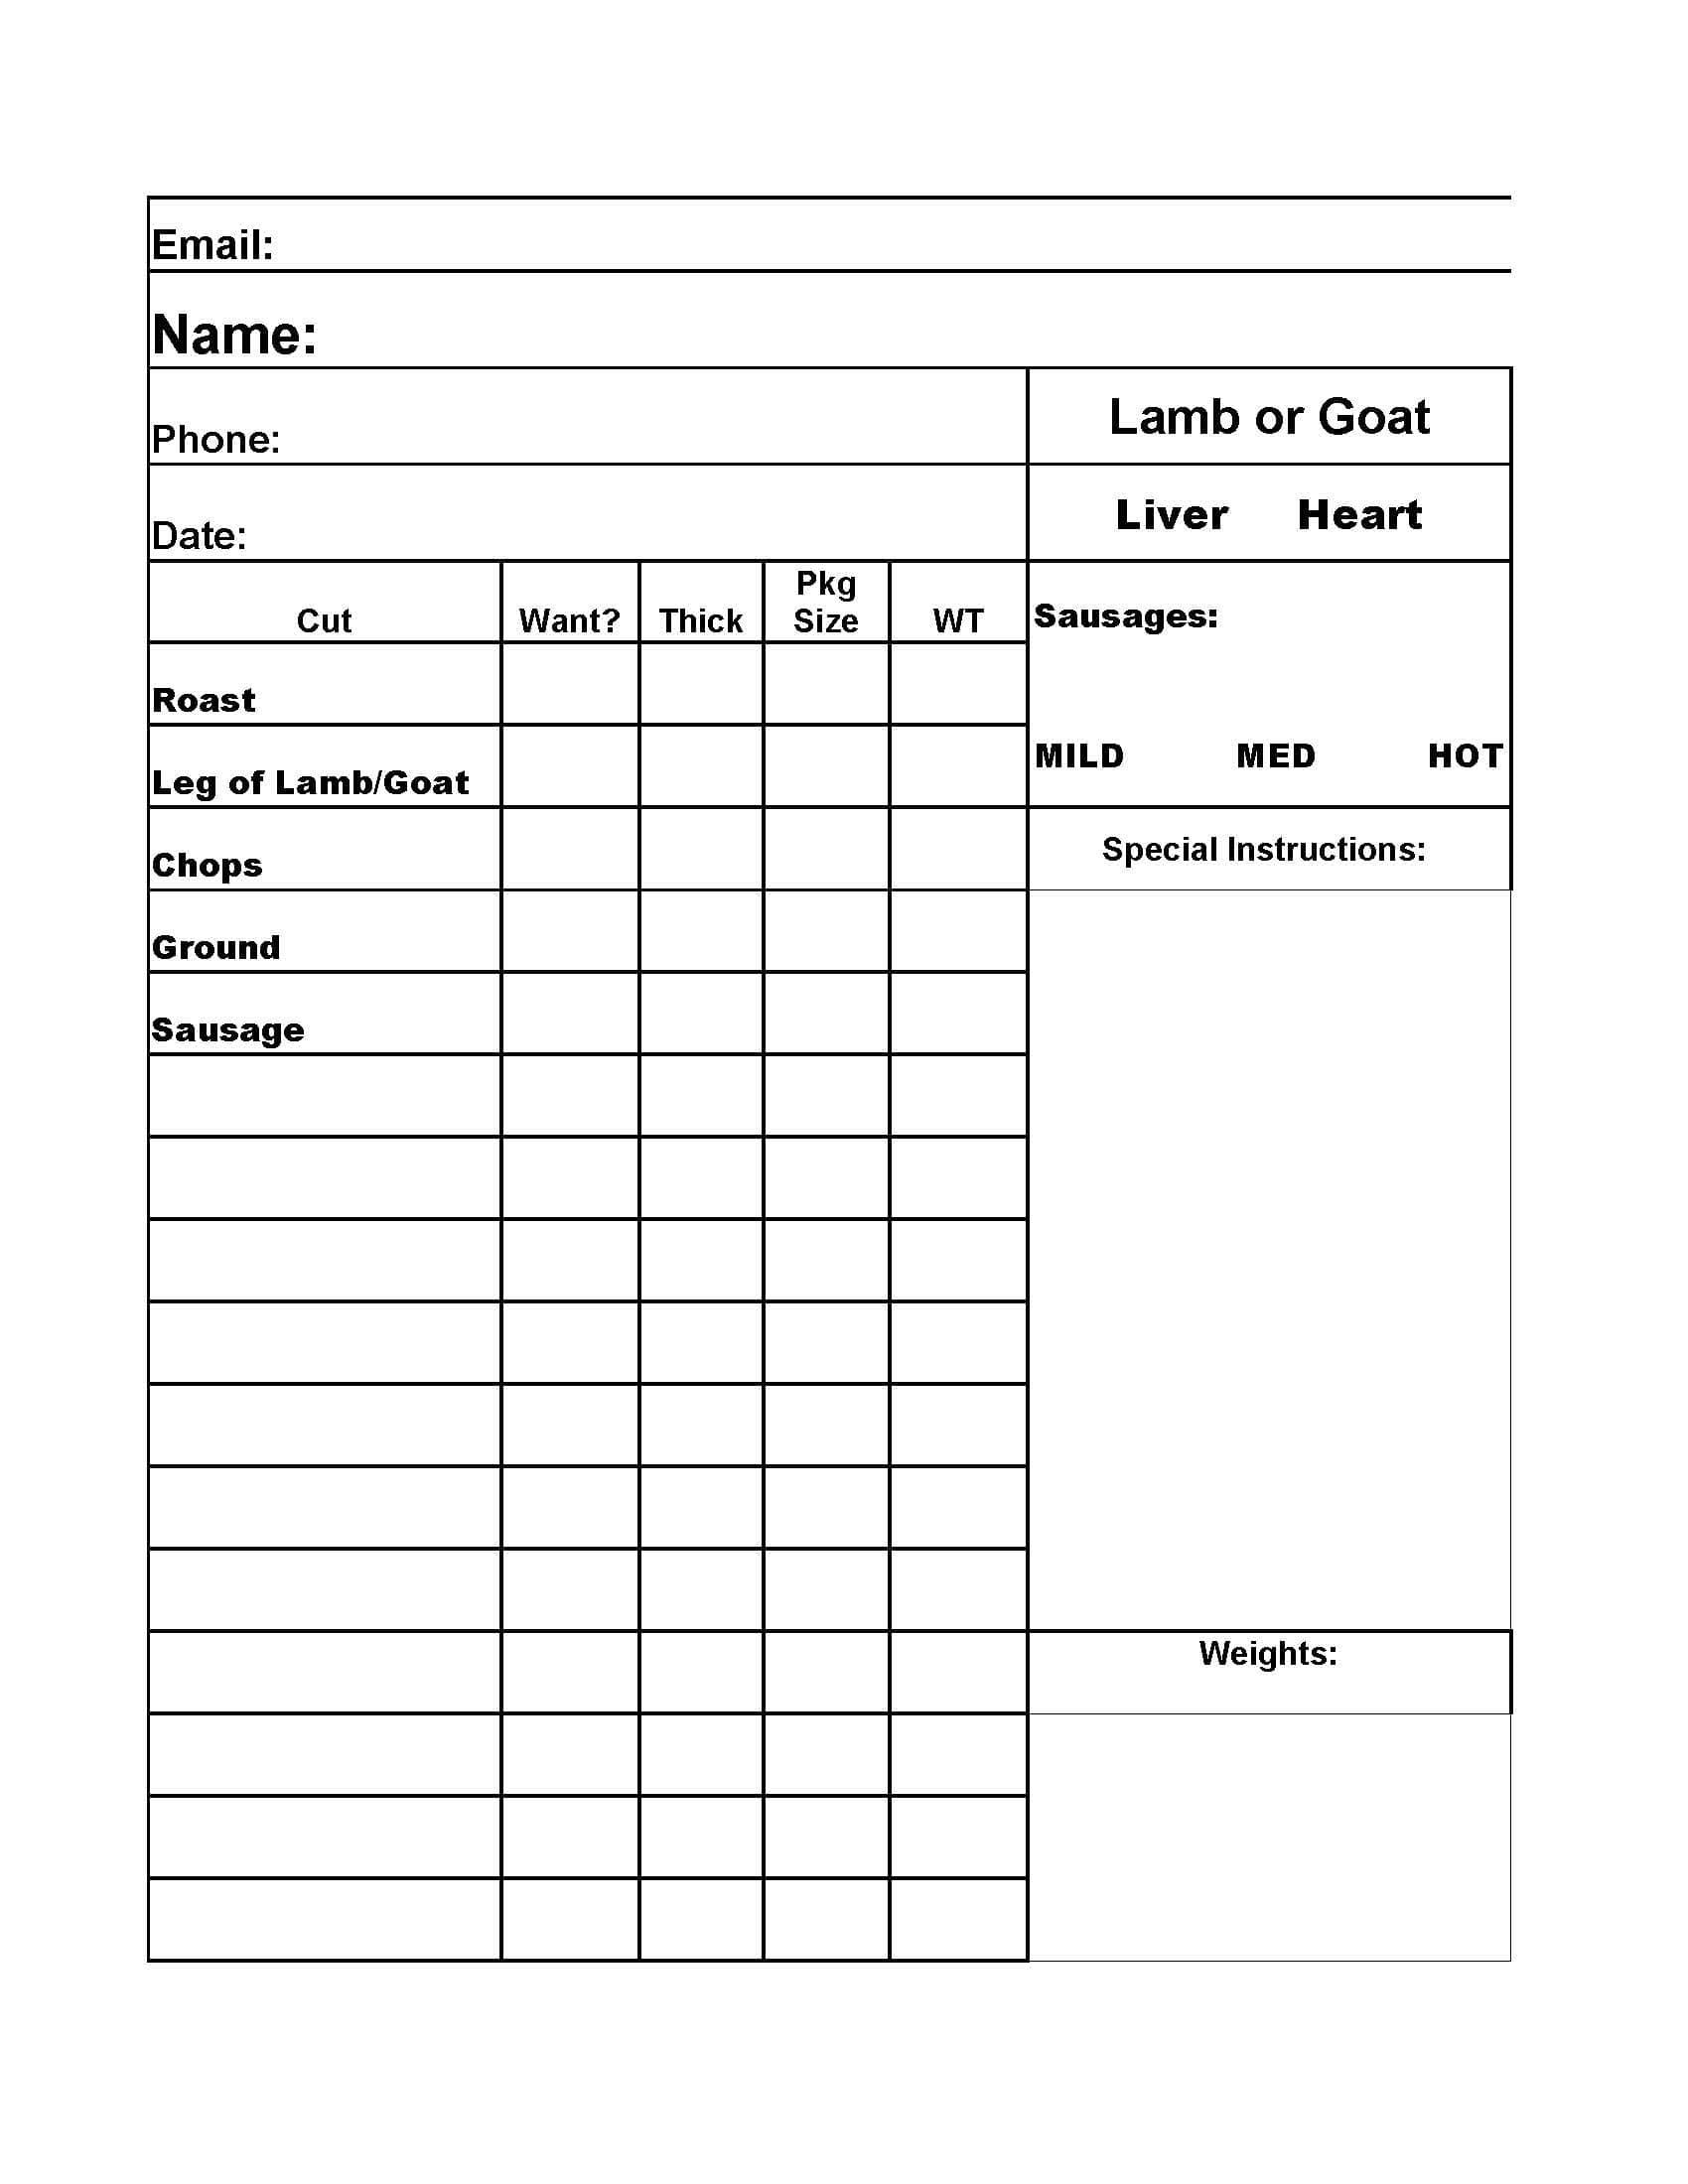 a sheet of paper with lamb or goat cut selection for processing